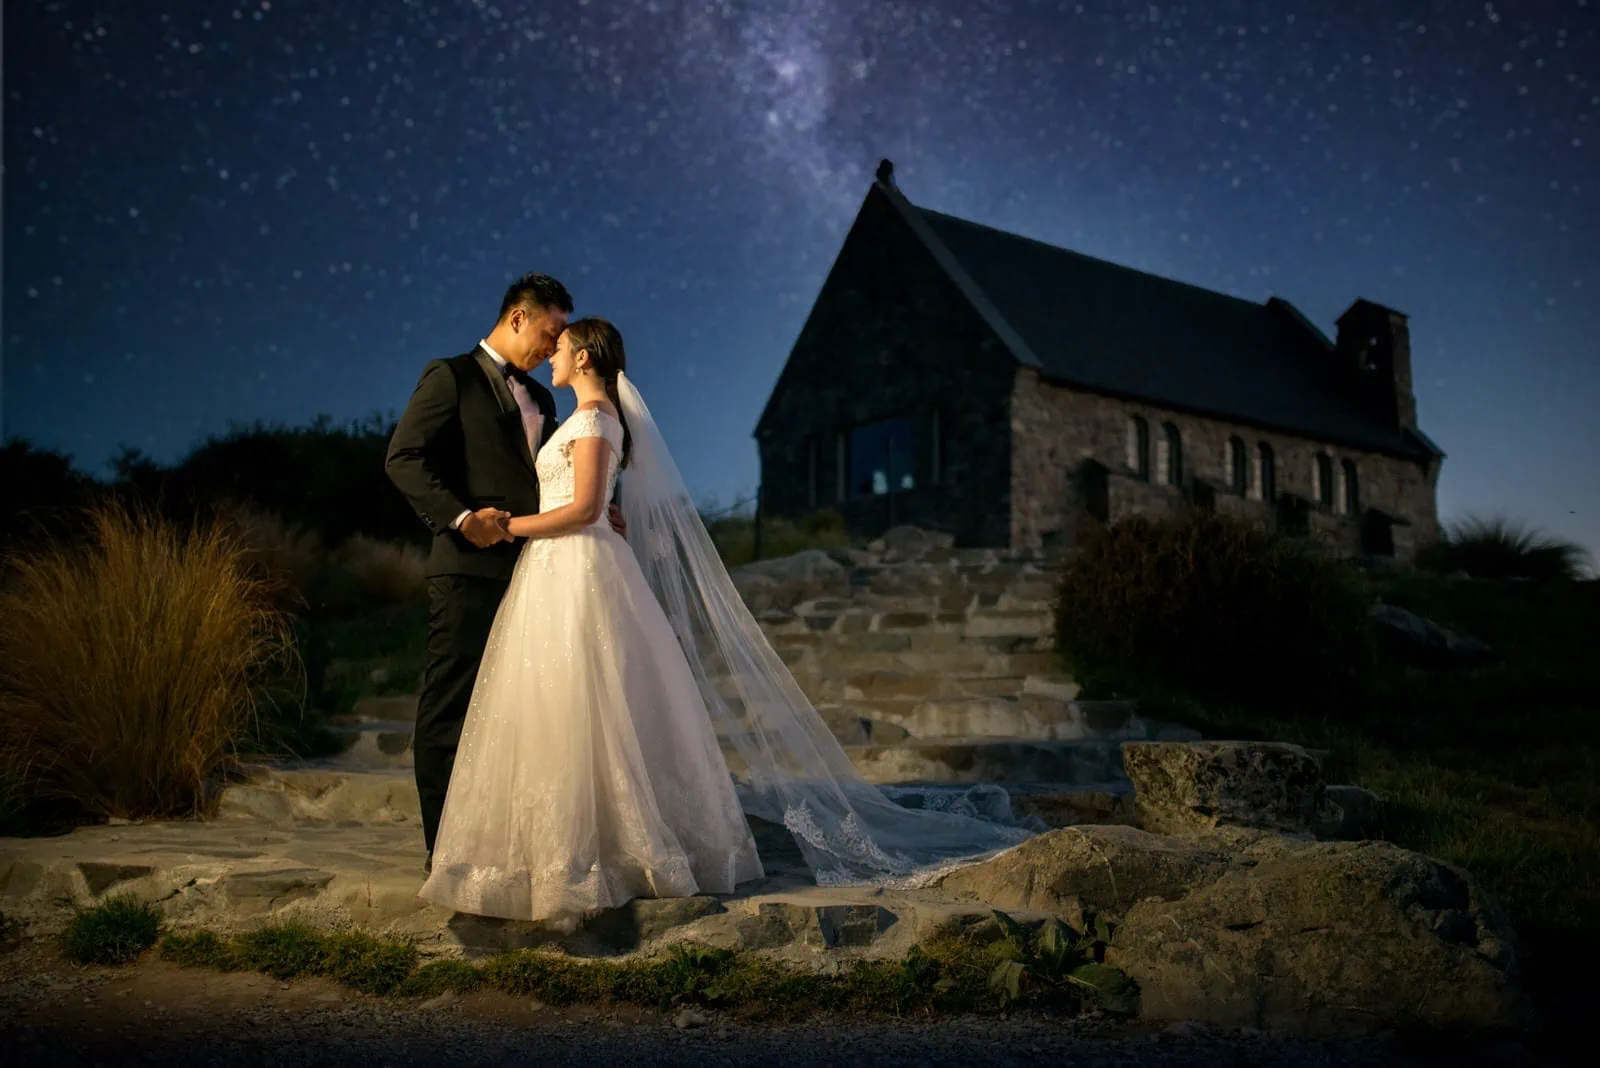 Queenstown New Zealand Elopement Wedding Photographer - A bride and groom have a romantic starry night shoot in front of a church in New Zealand, showcasing their portfolio of stunning wedding photos.